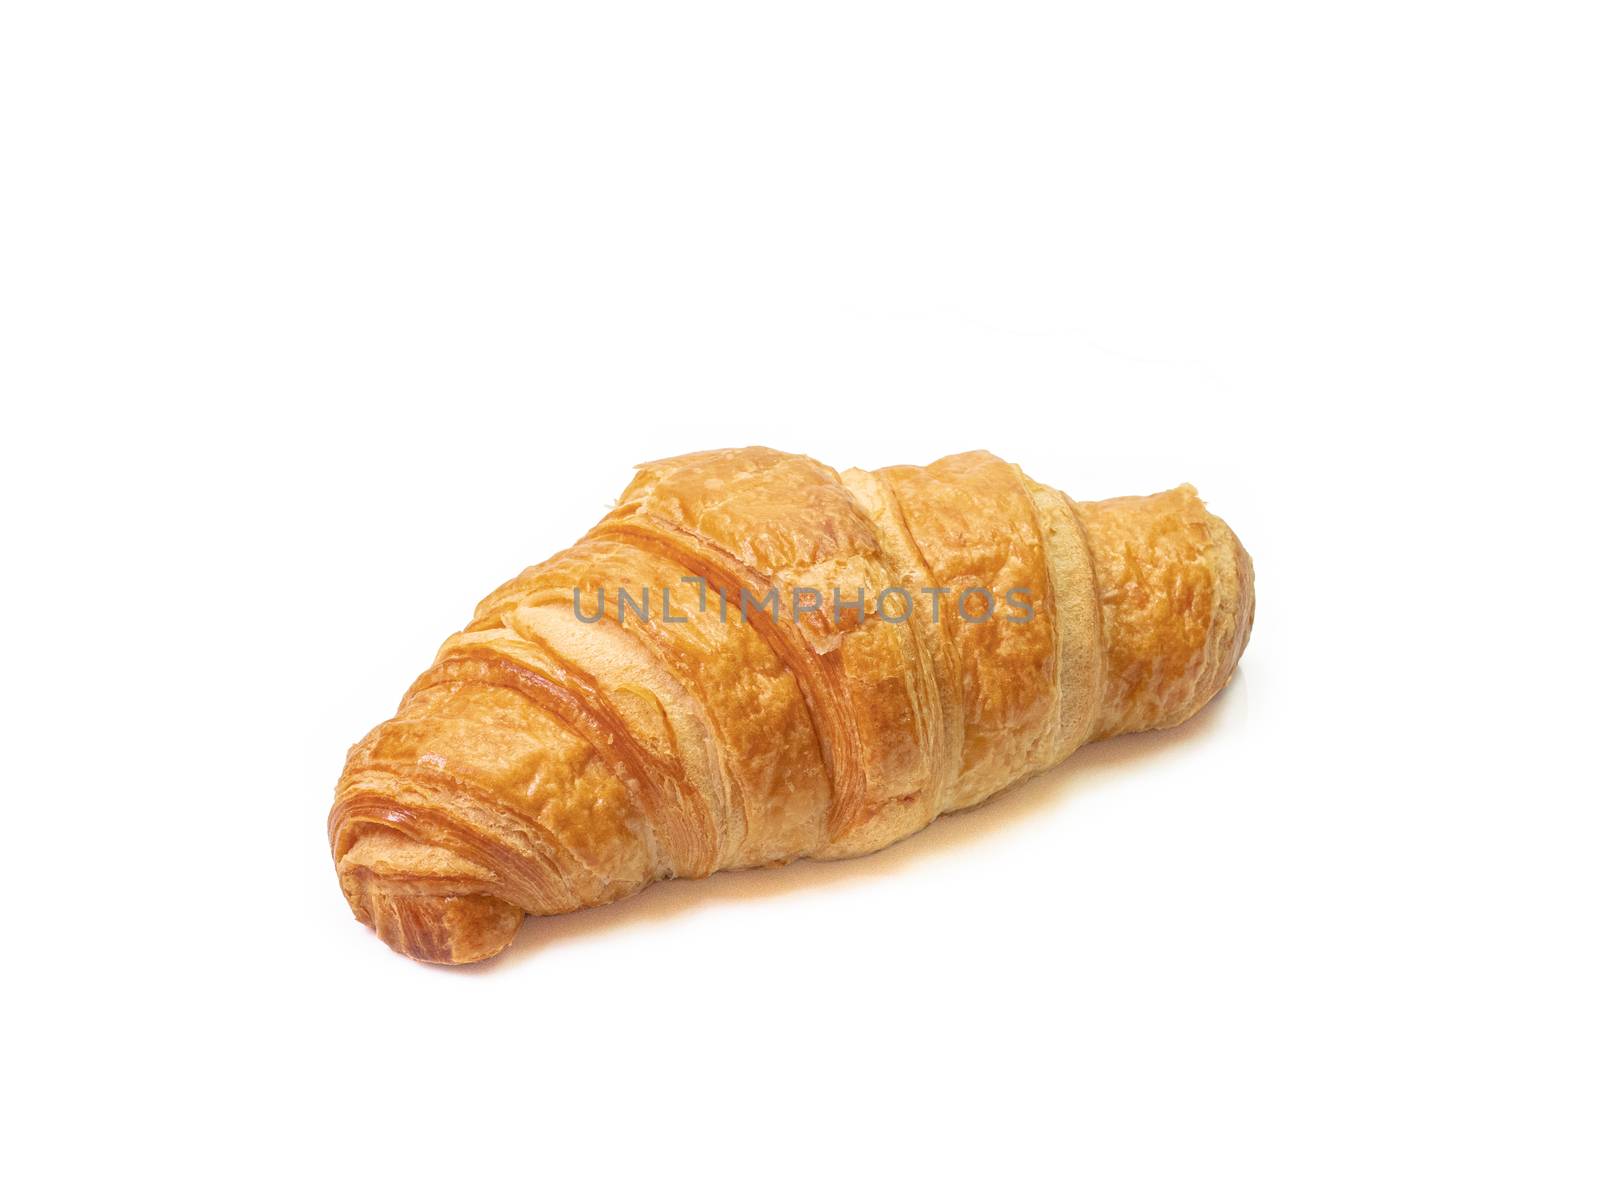 The close up of delicious butter croissant bakery on white background.